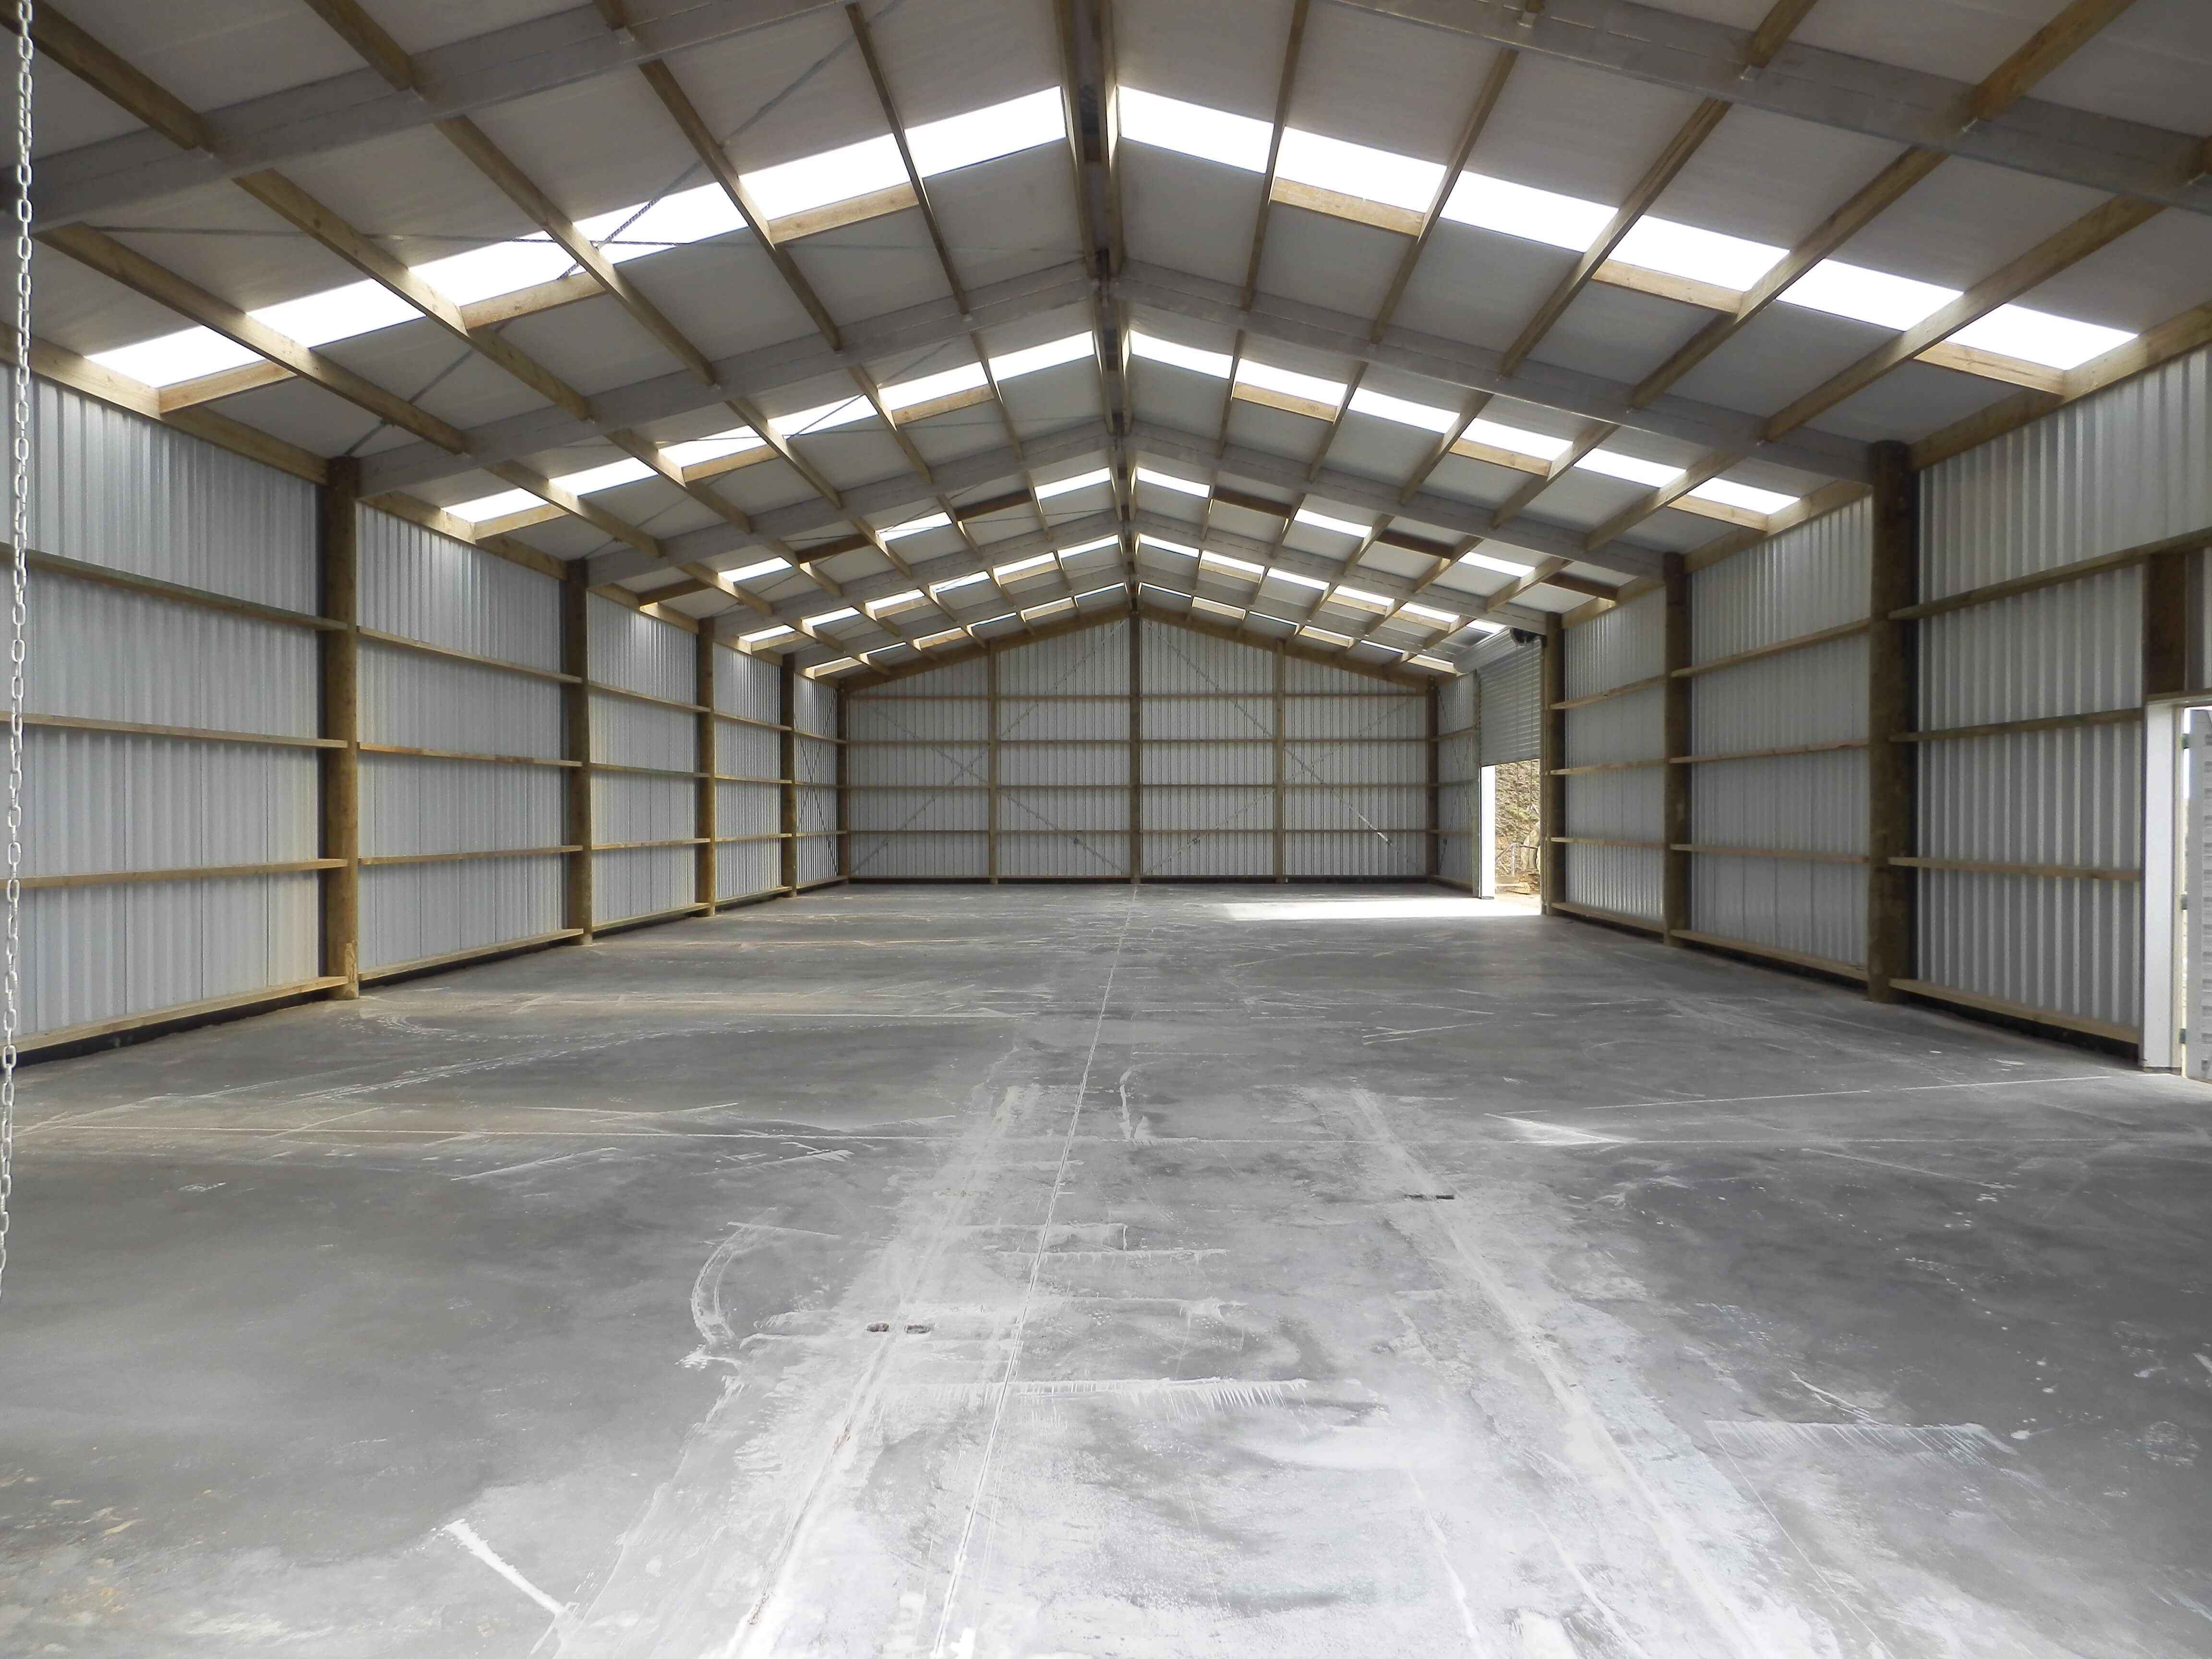 We organise the right building consent for your large workshop shed